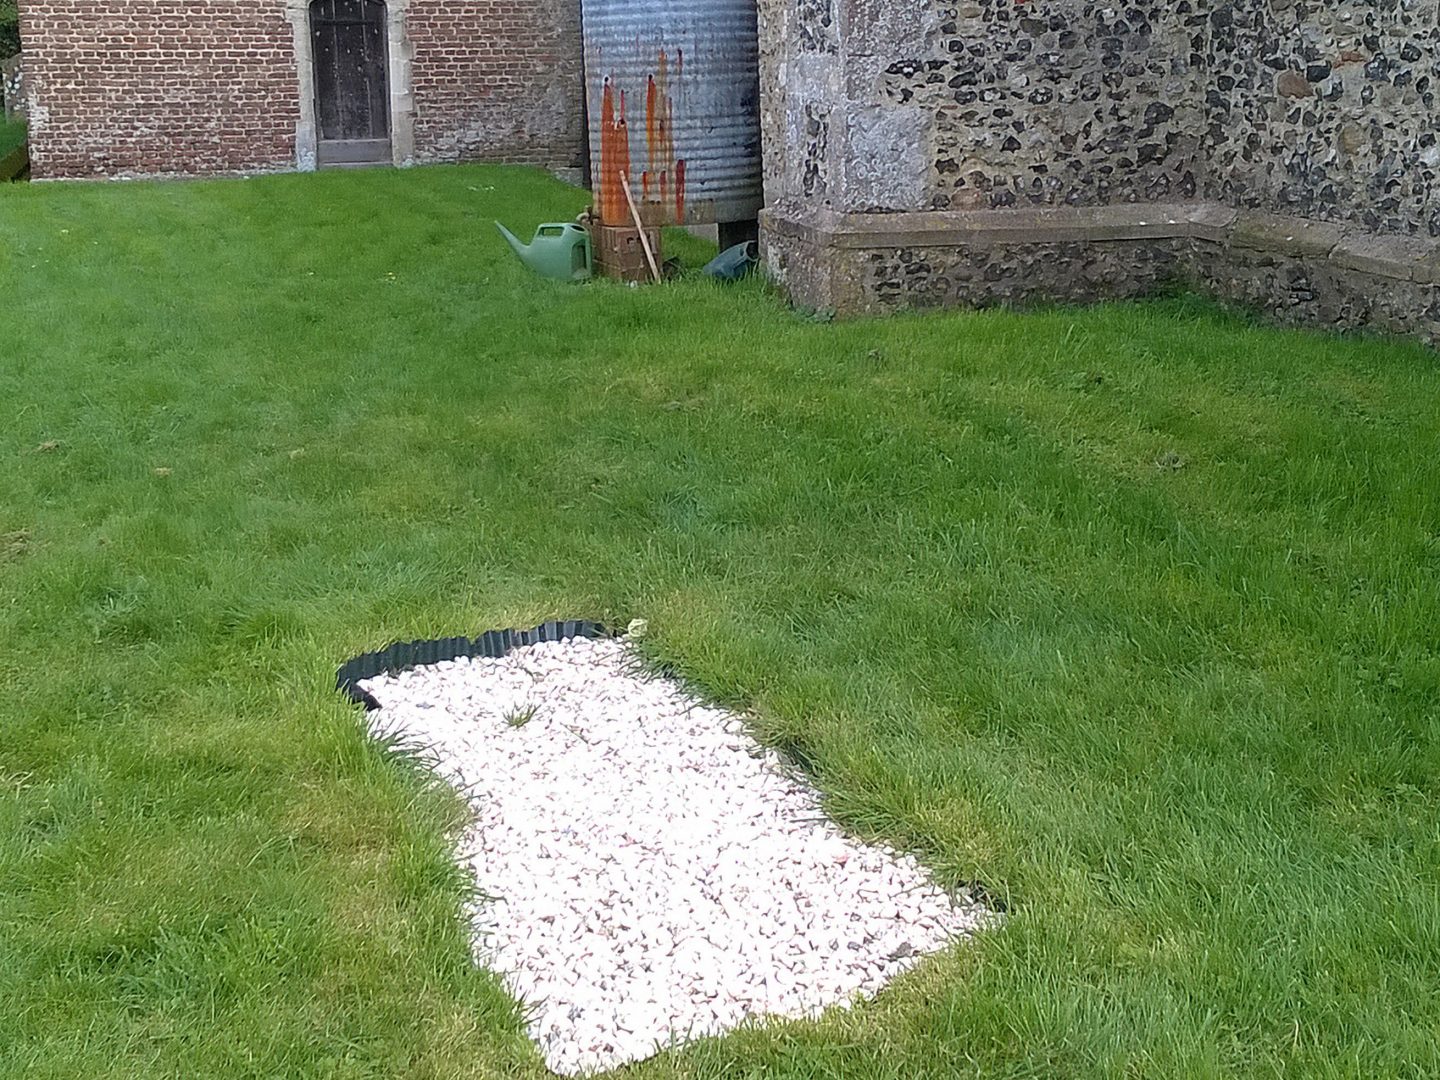 Mystery unmarked grave appears in churchyard.